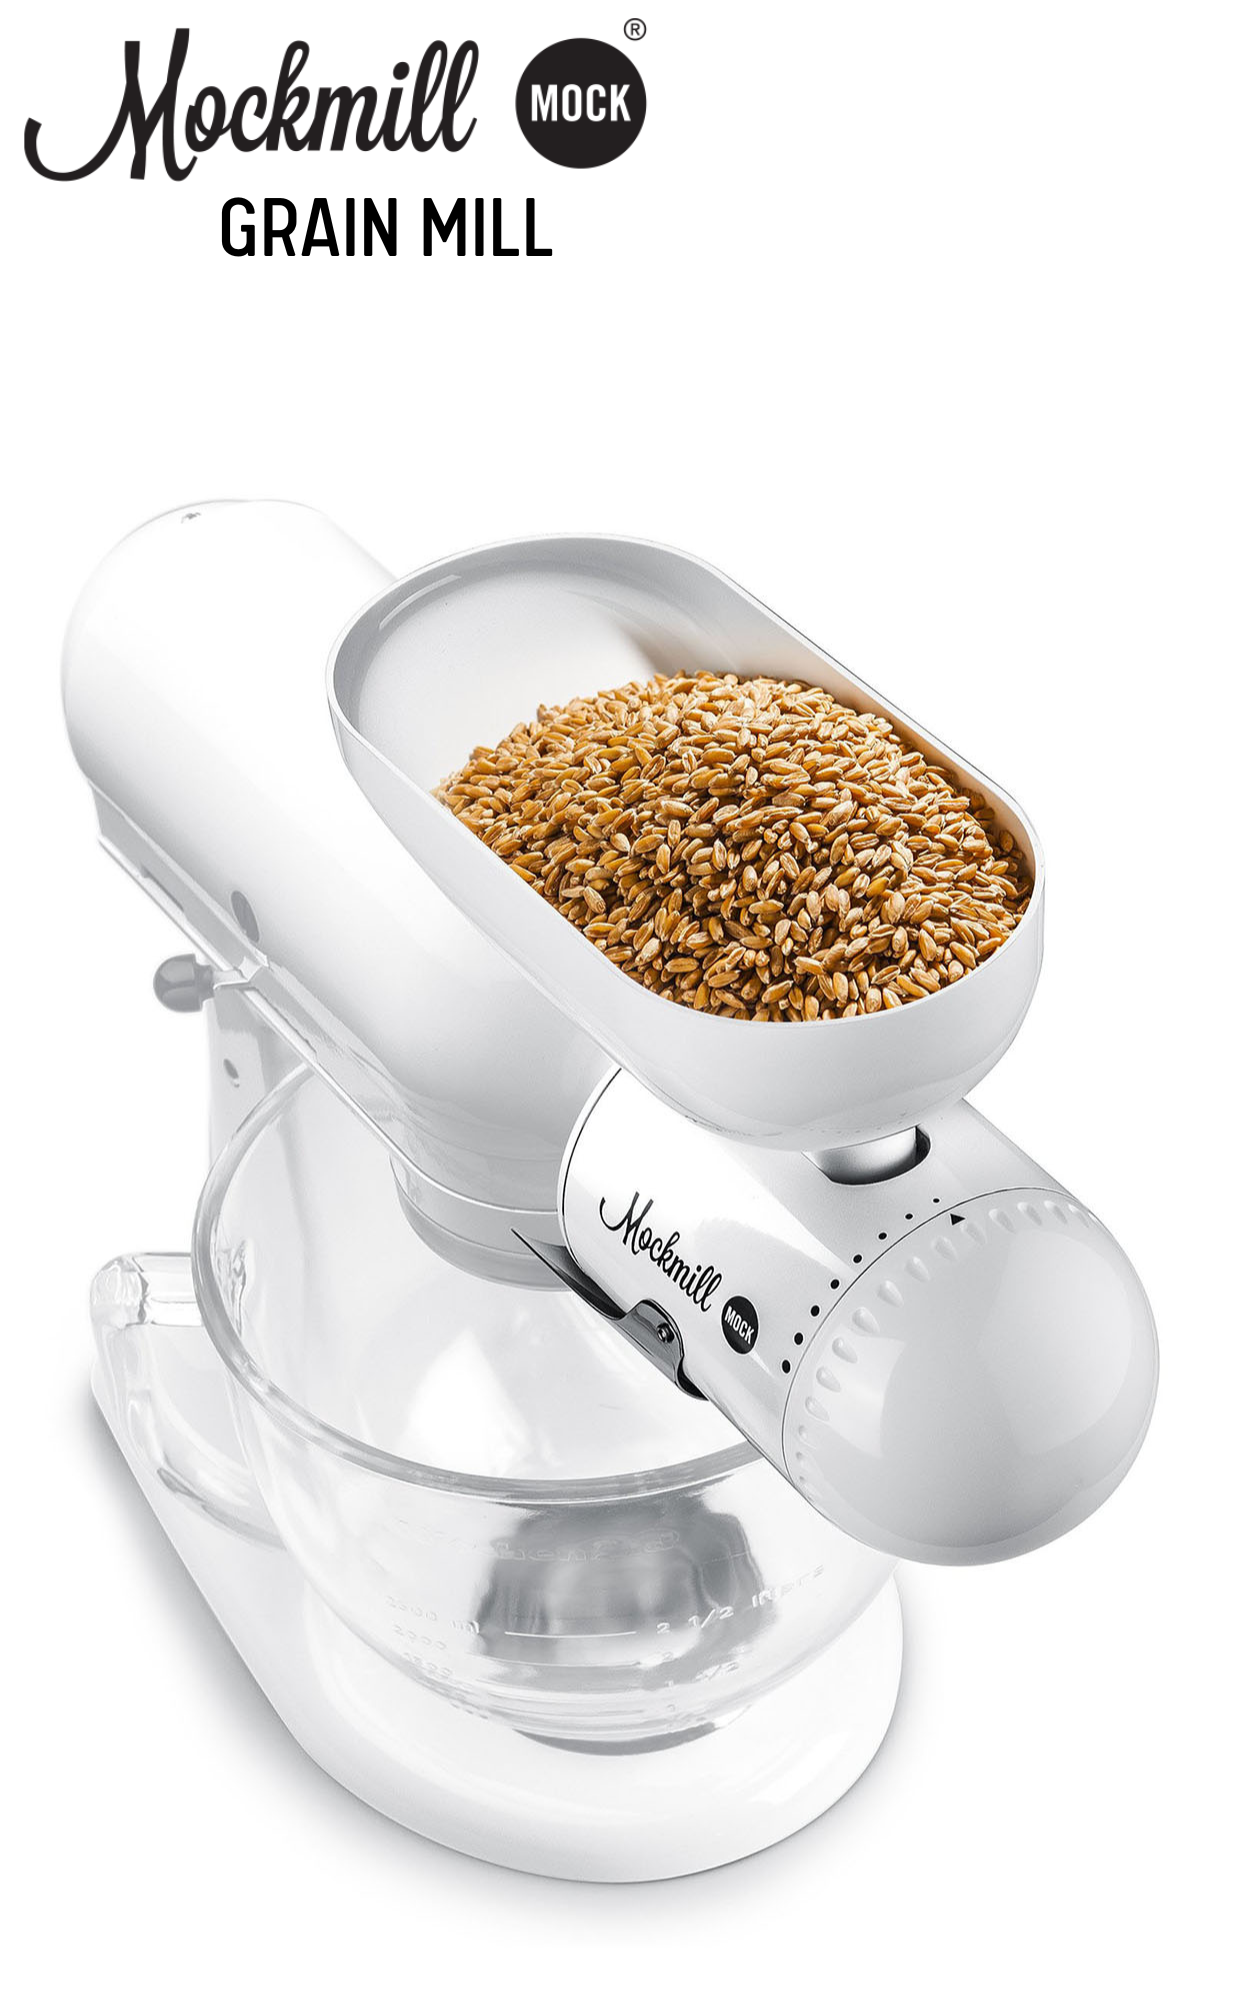 Mockmill - The Grain Revolution is Here